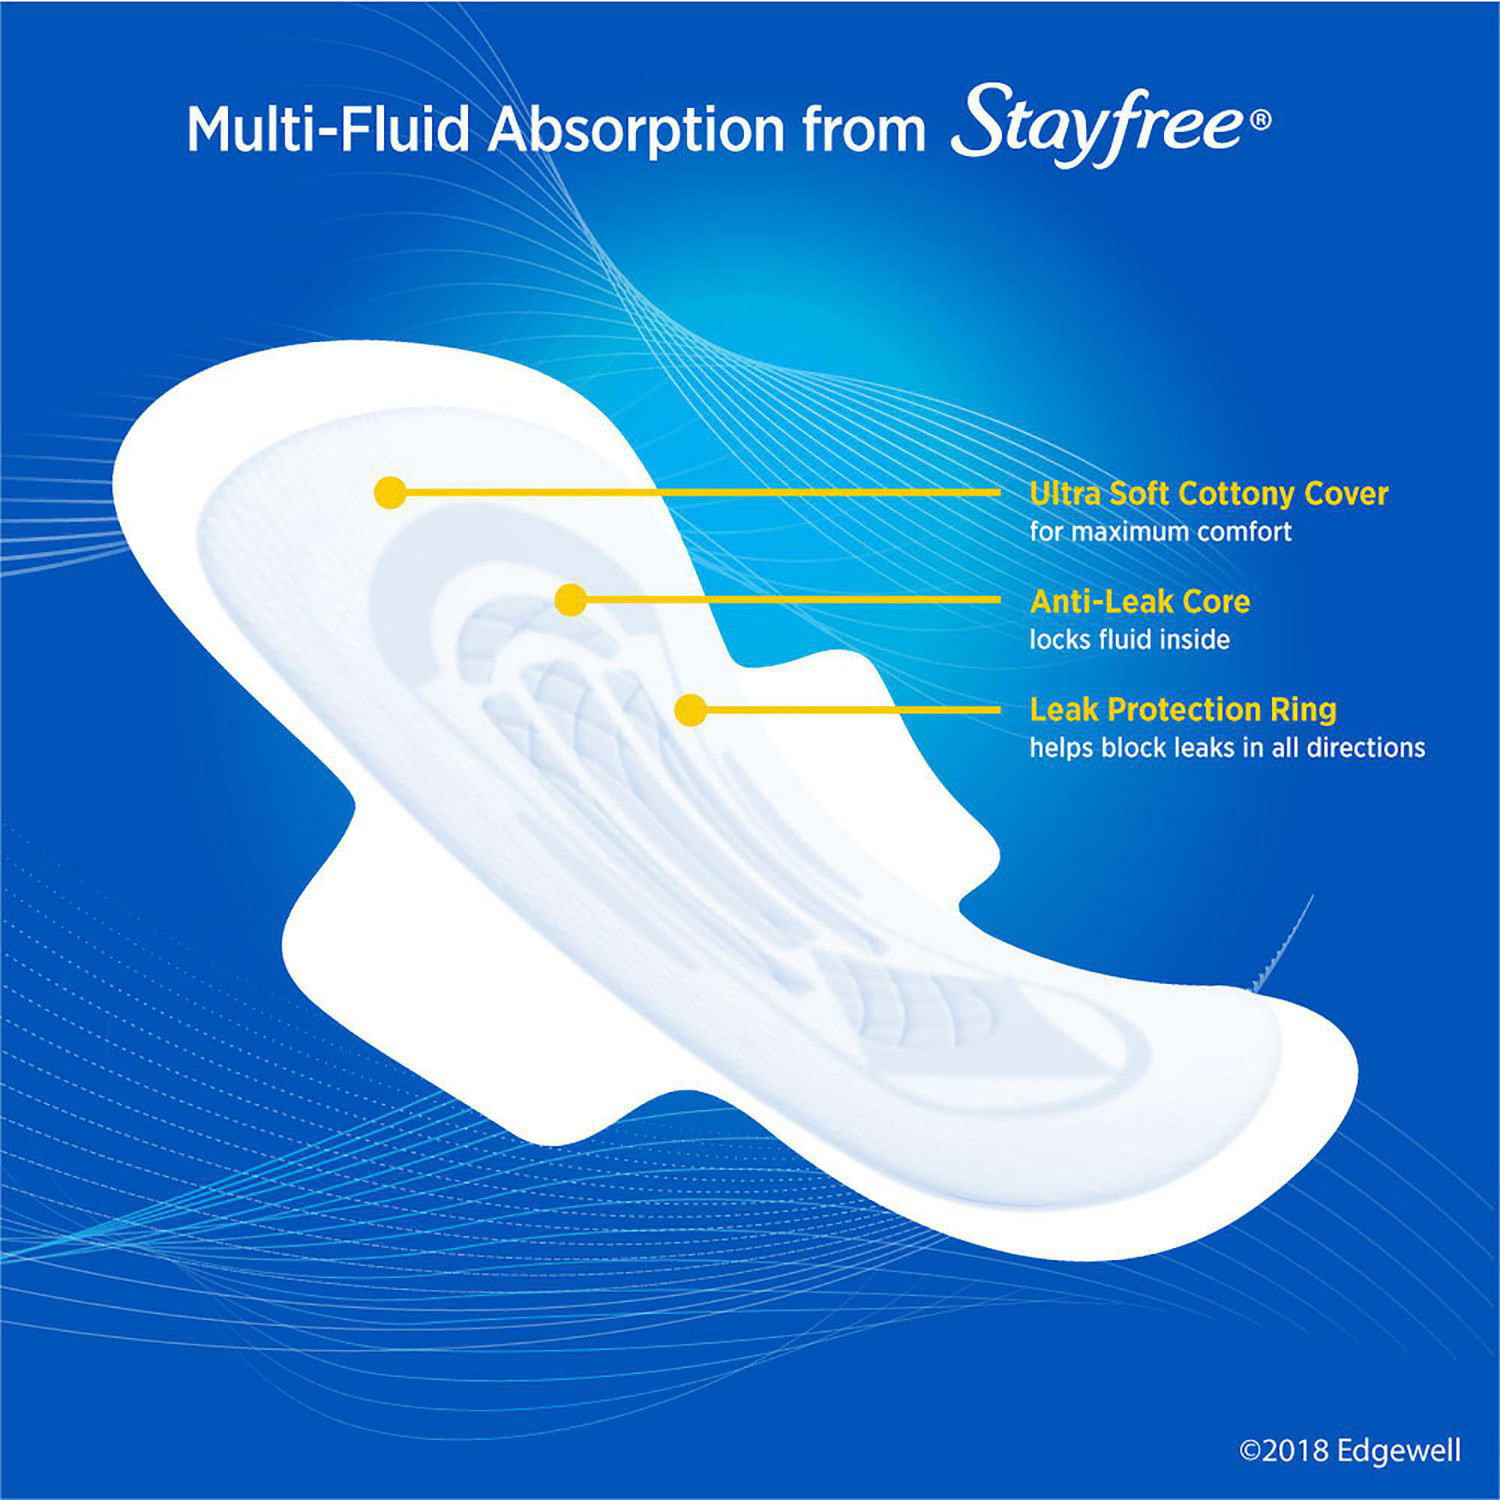 Stayfree Maxi Overnight Pad with Wings - 28 count per pack -- 4 packs per  case